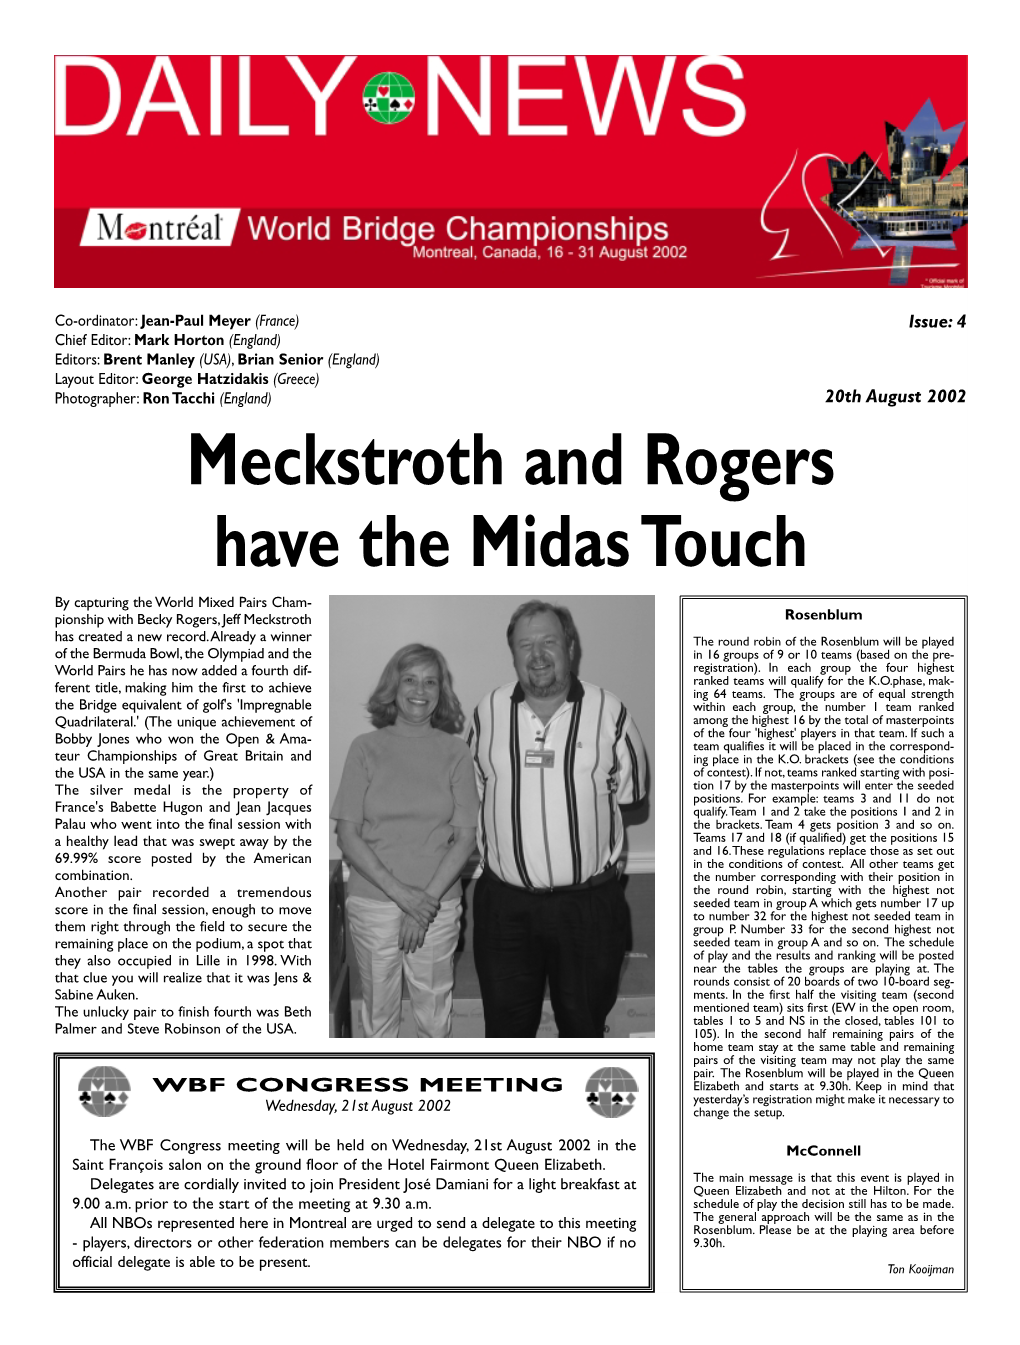 Meckstroth and Rogers Have the Midas Touch